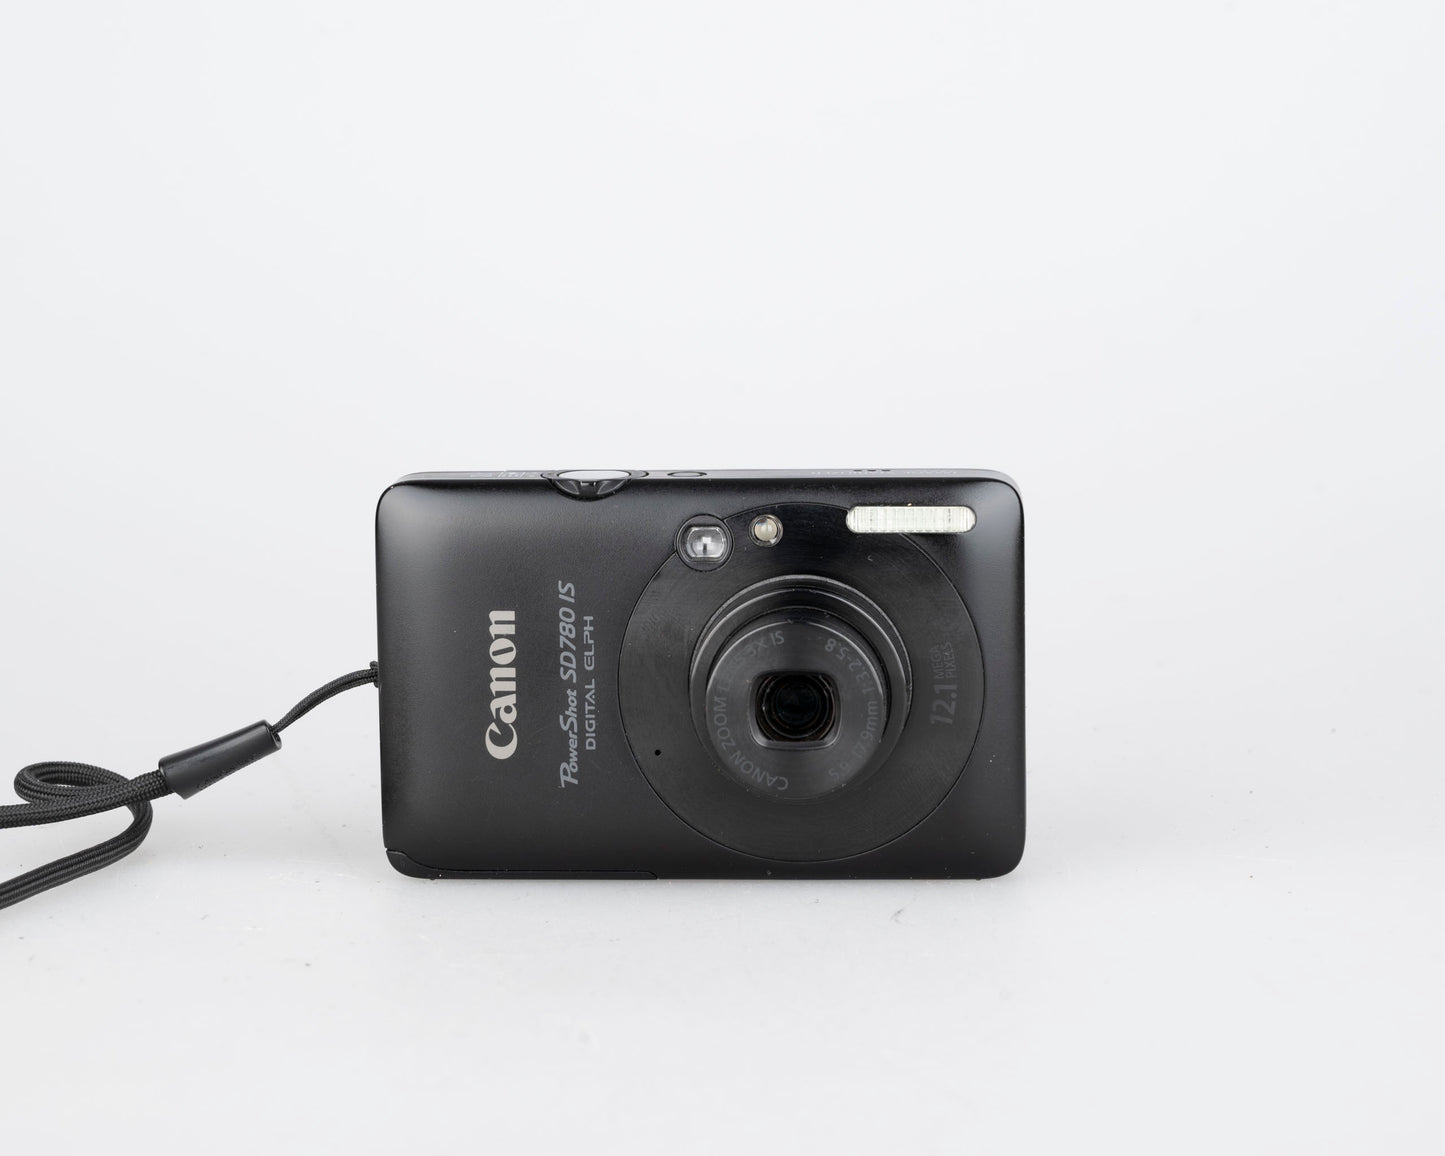 Canon Powershot SD780 IS Digital Elph 12.1MP CCD digicam w/ 16GB SD card + 2 batteries + charger